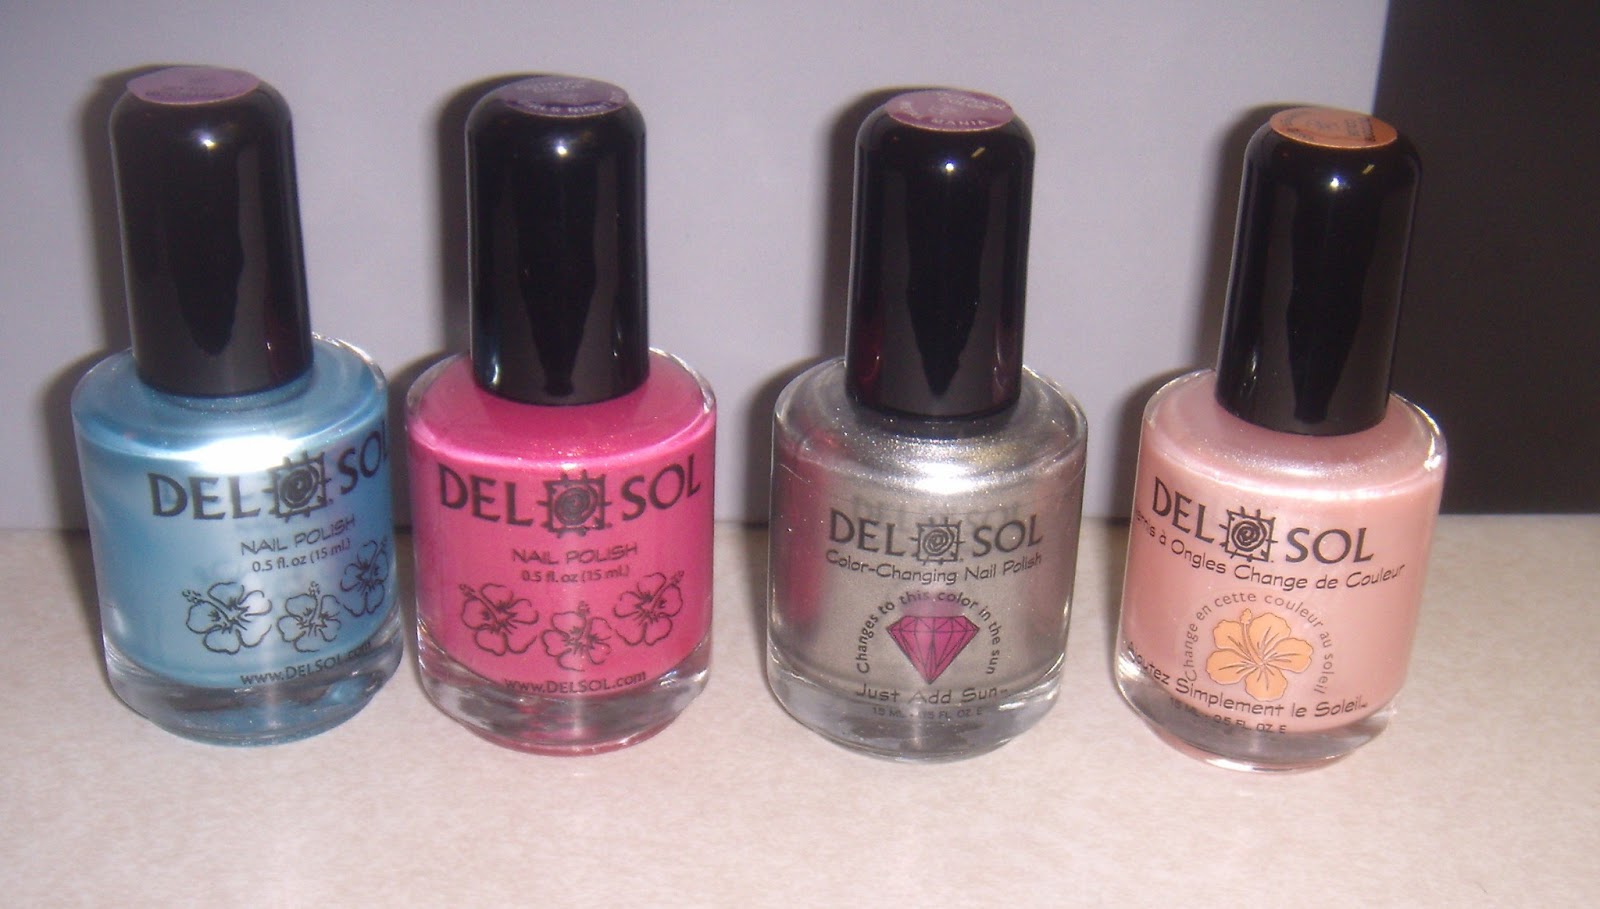 1. Del Sol Color Changing Nail Polish - wide 8